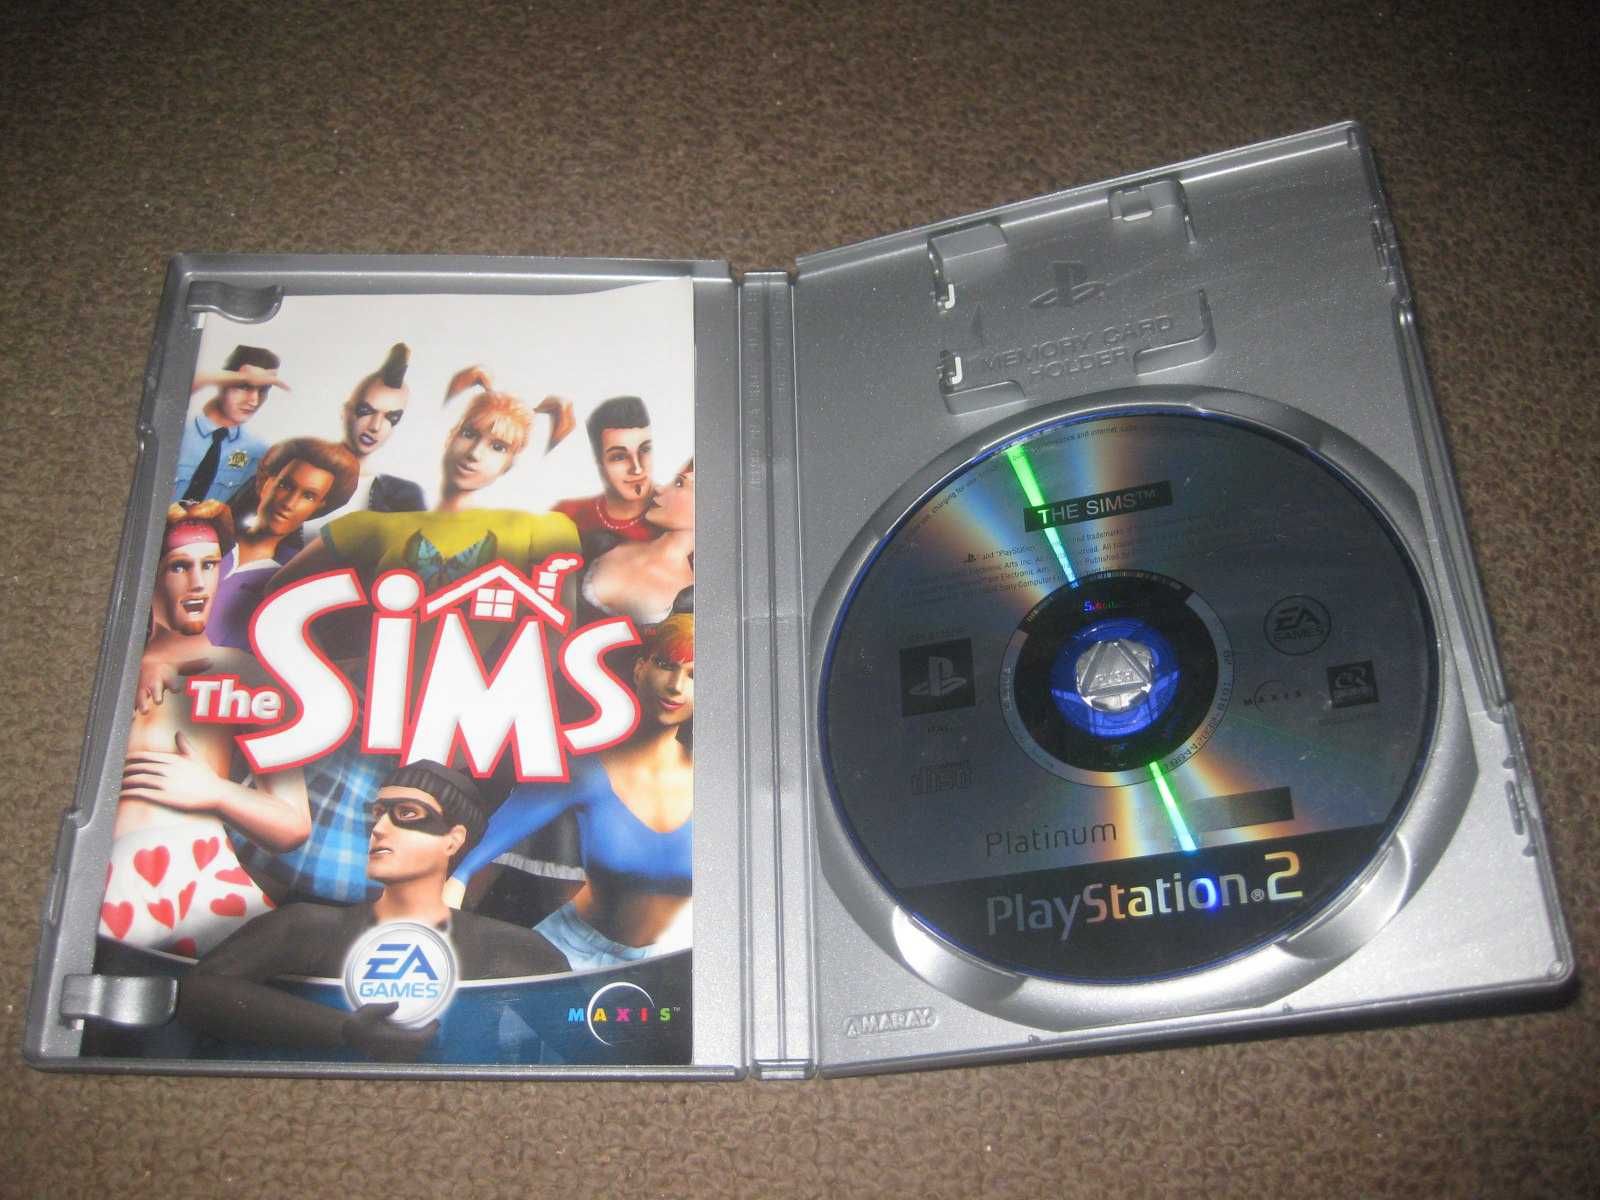 Jogo "The Sims" PS2/Completo!